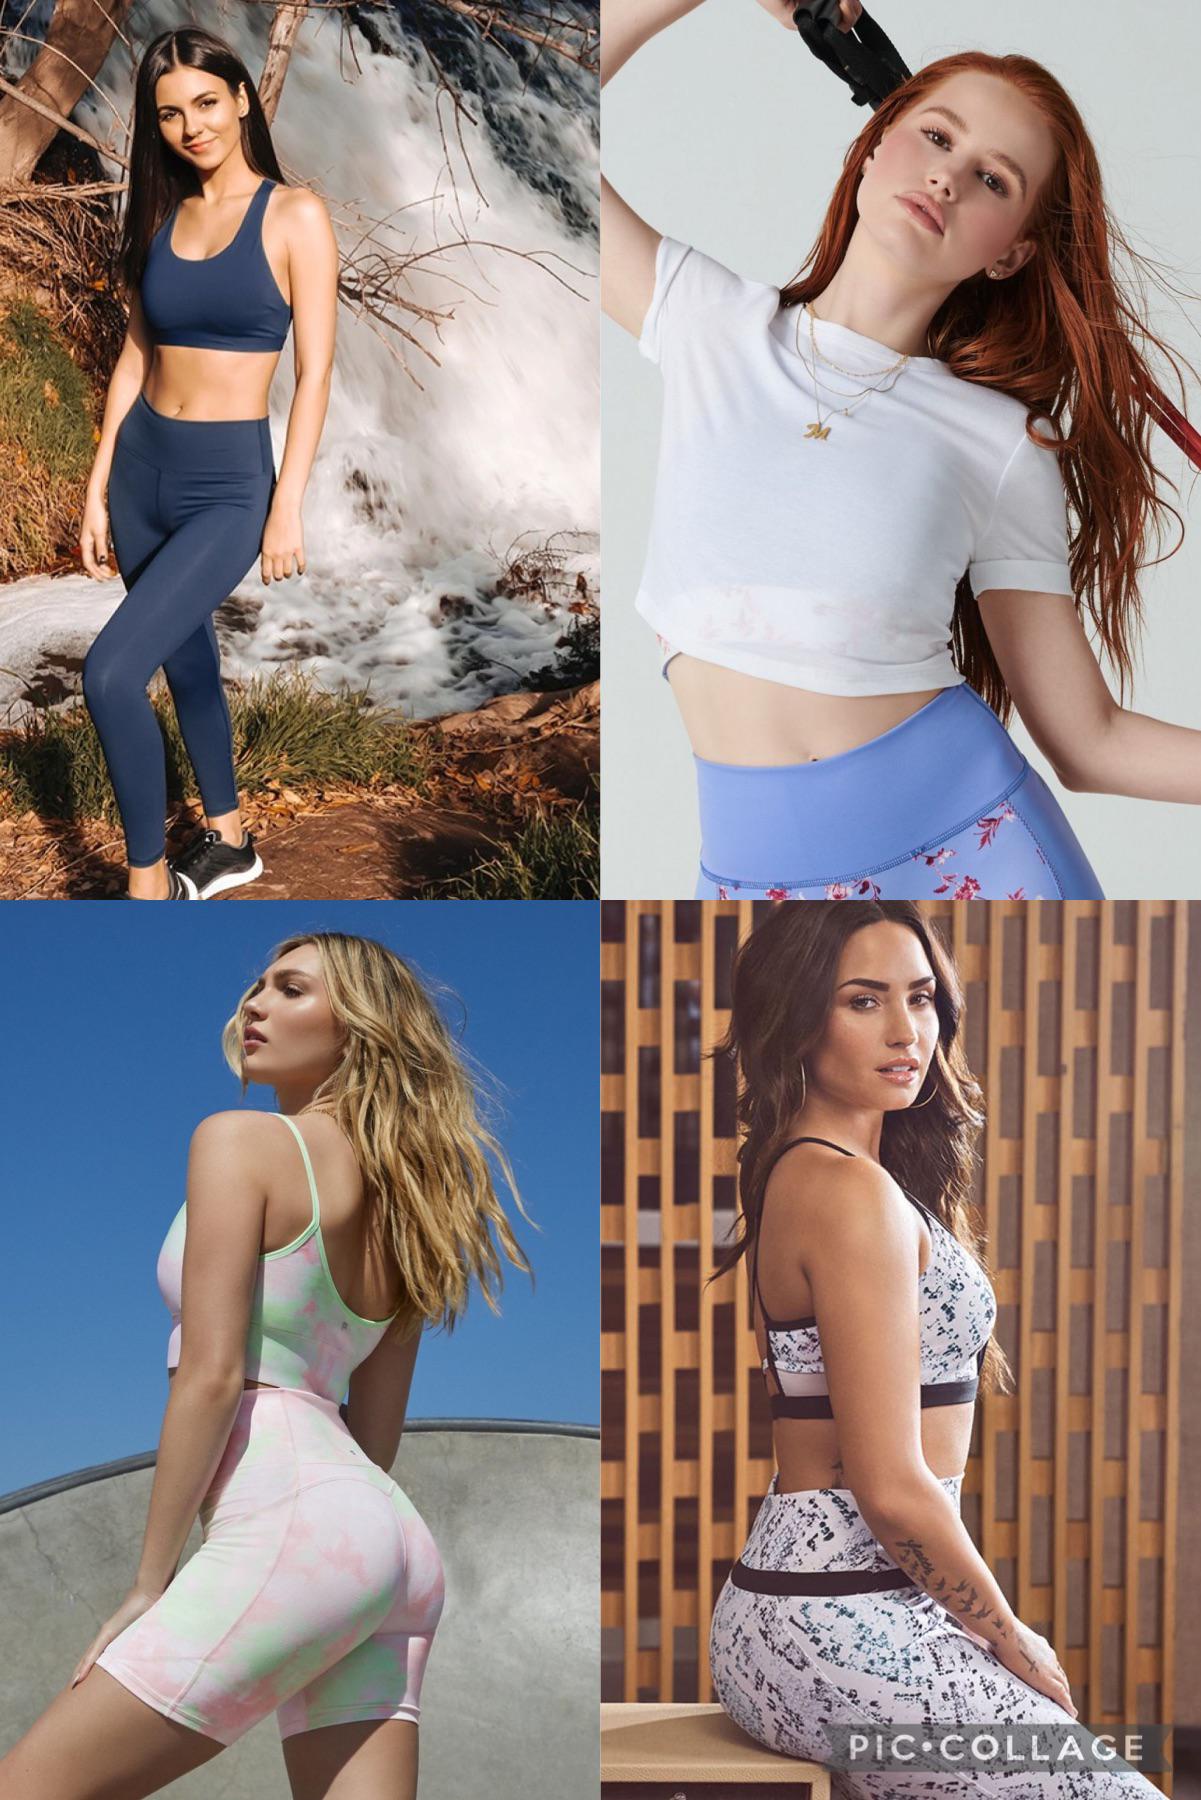 Demi Lovato Maddie Ziegler Madelaine Petsch Victoria Justice Smash 1, Marry 1, Kiss 1, Ignore 1 and why